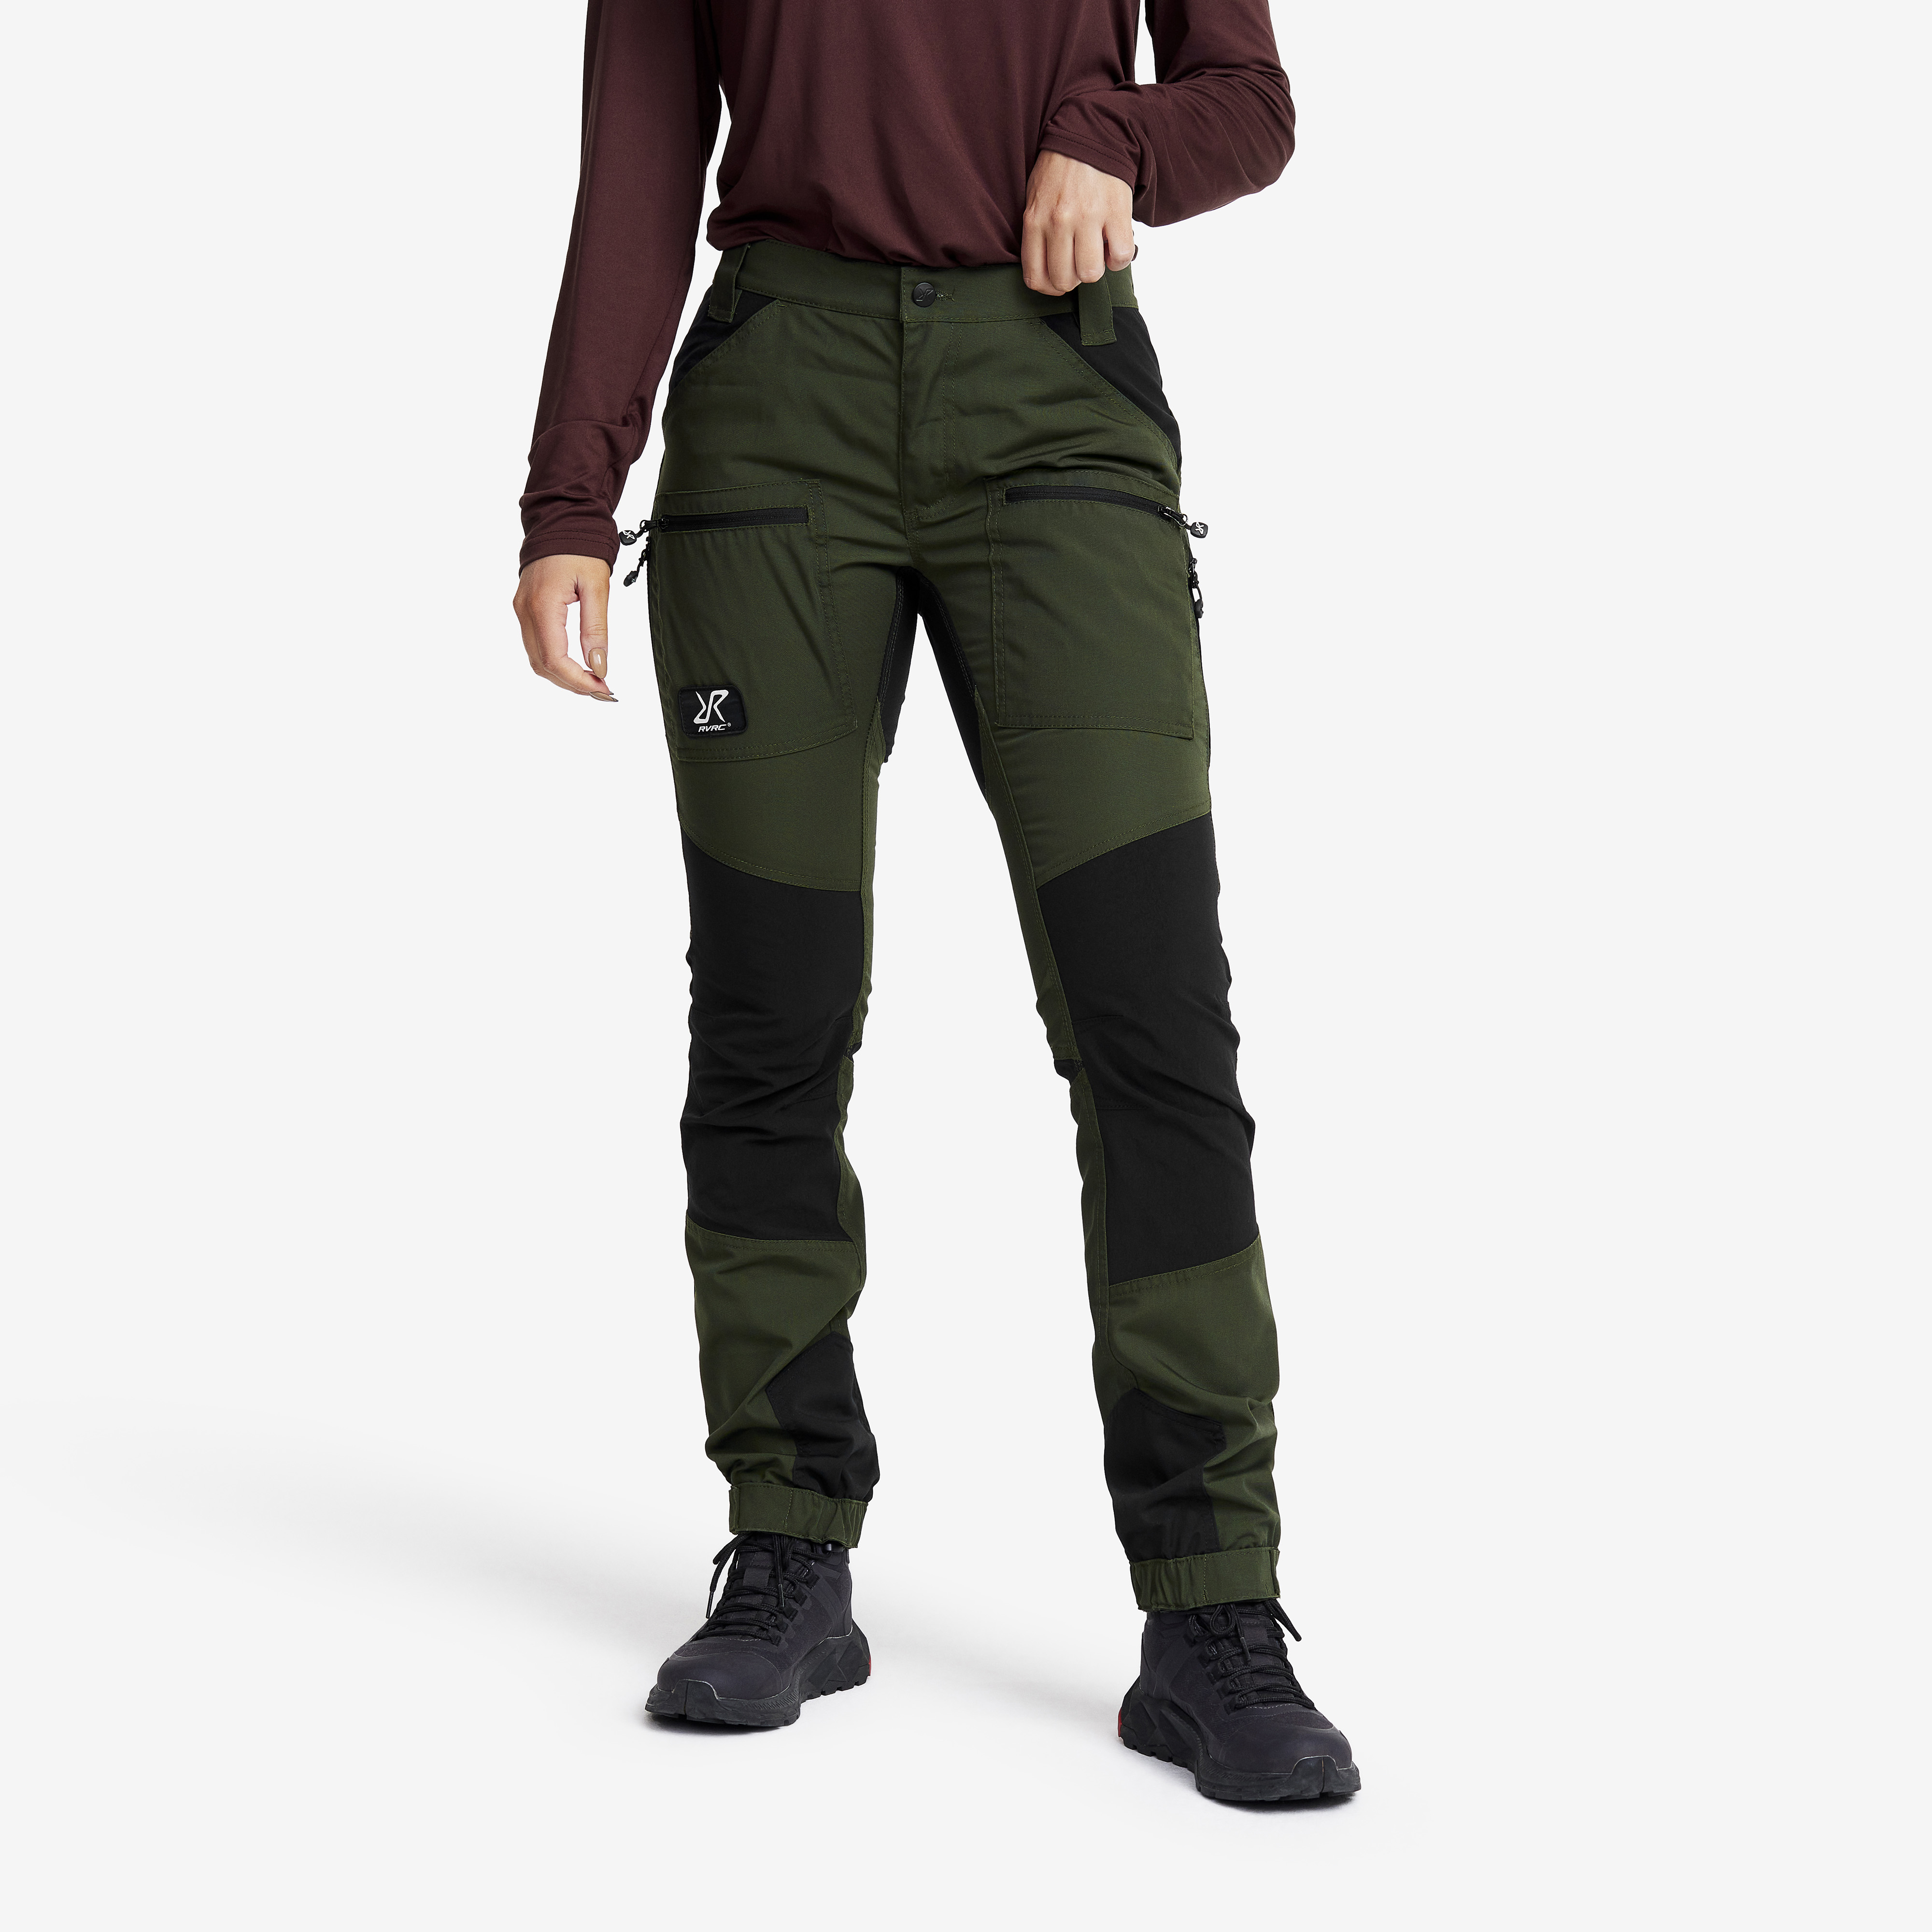 Nordwand Pro hiking trousers for women in green